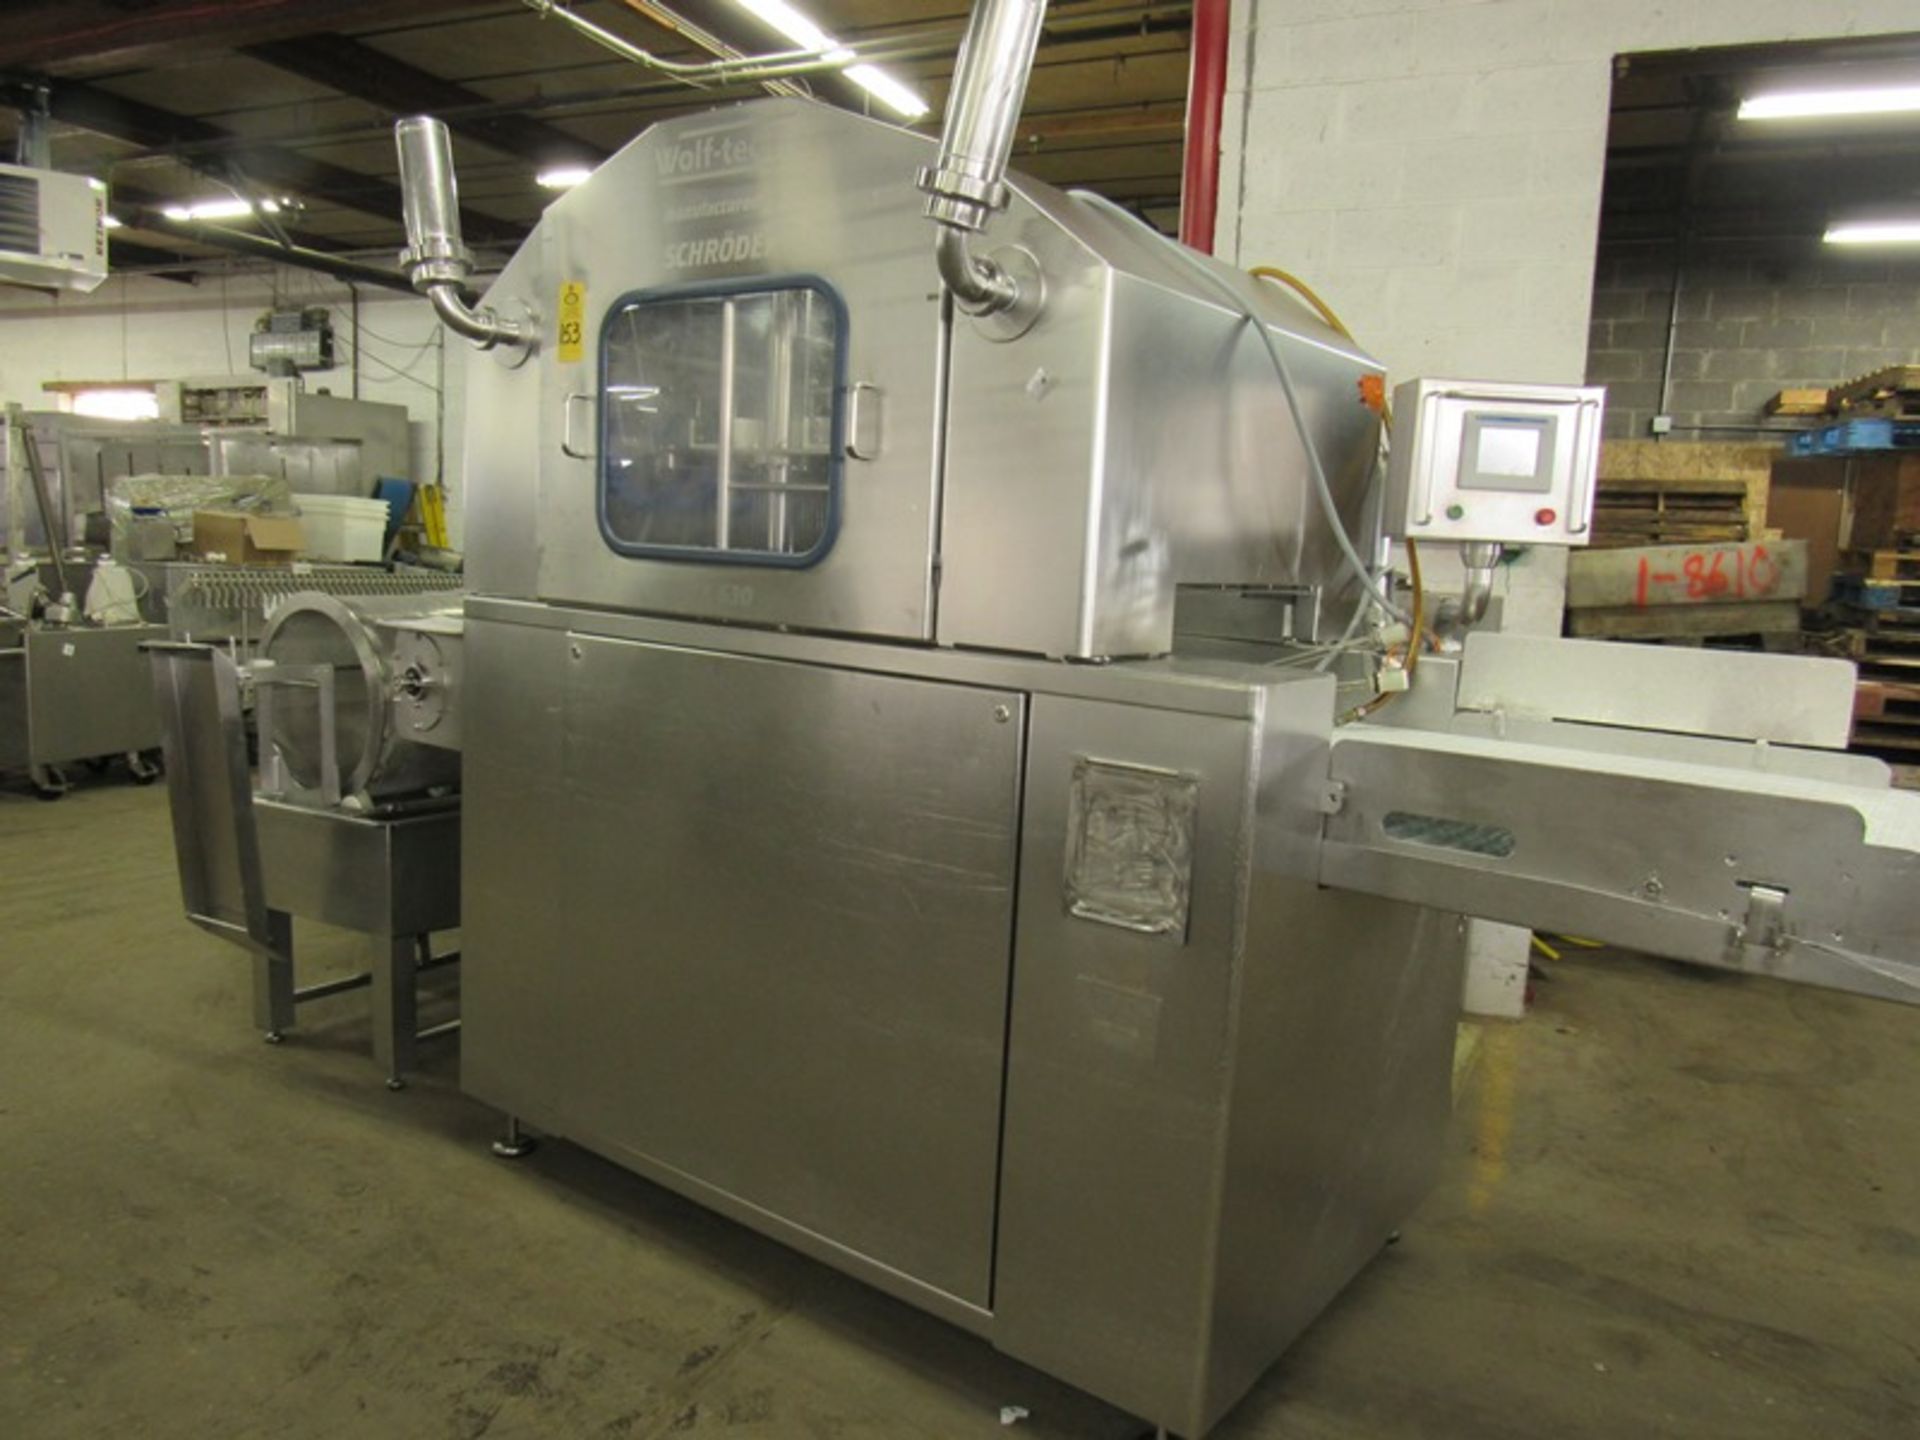 Schroeder Mdl. IMAX630 Wolftec Injector, double head, 273 needles head, 24" W X 10' L intralox - Image 3 of 32